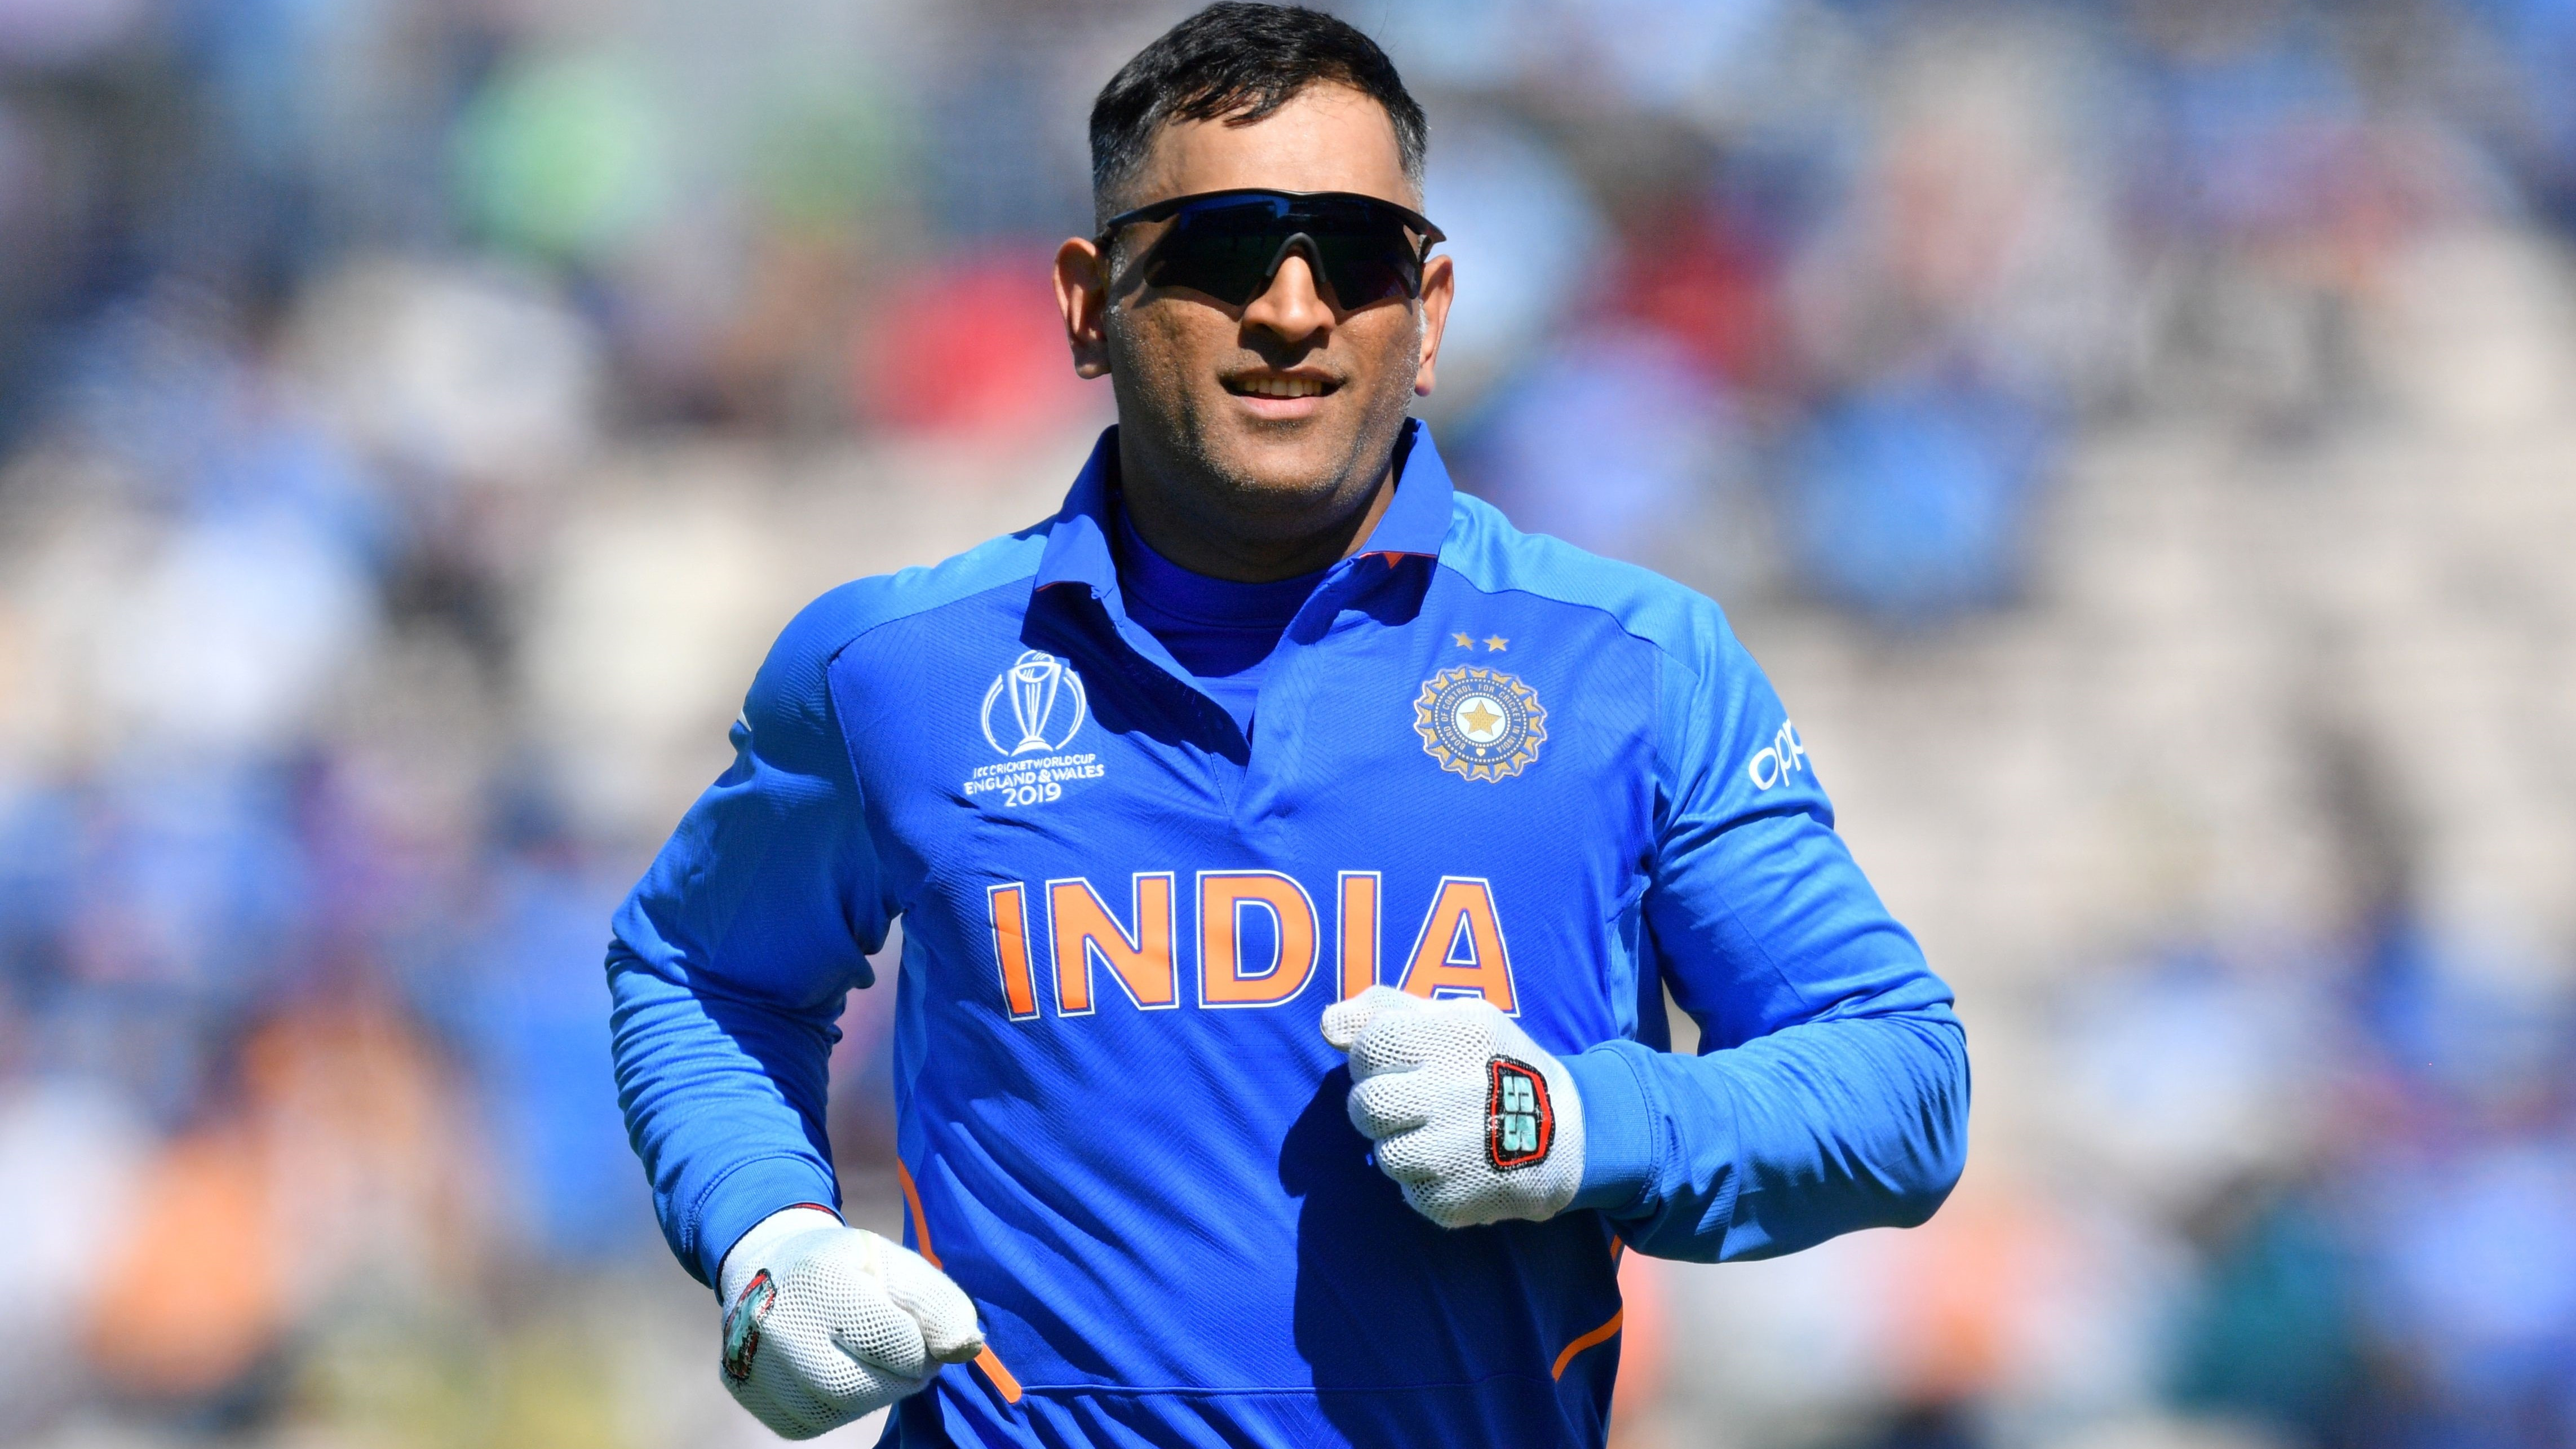 'I am blessed to be a Bharatiya': MS Dhoni puts tricolor as new Instagram DP ahead of Independence Day